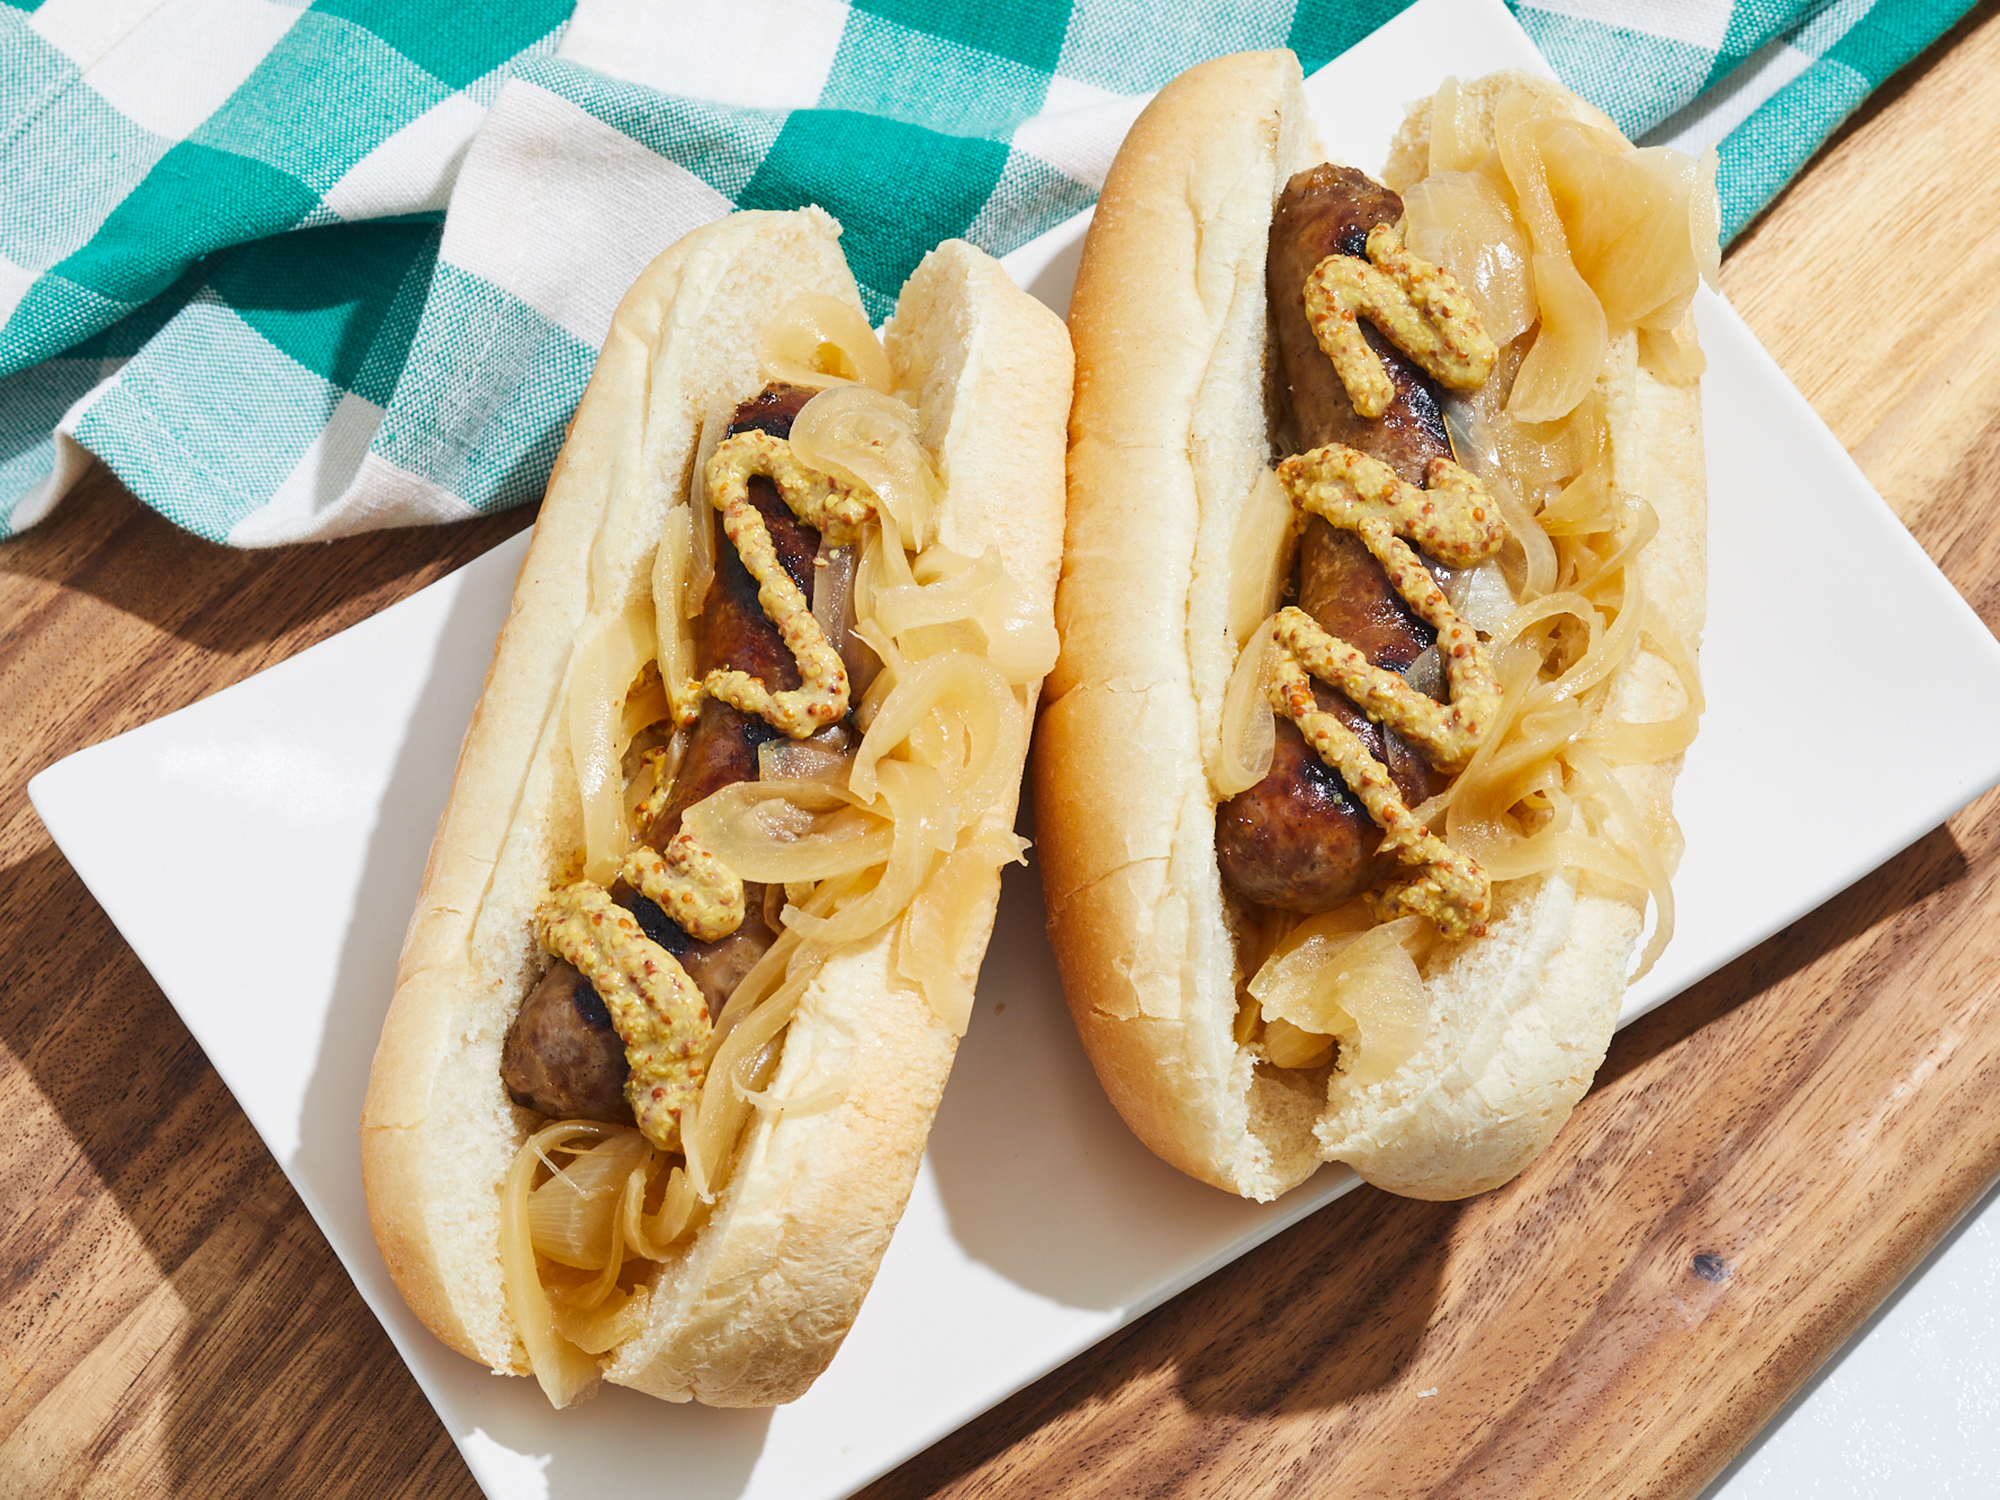 looking at two Wisconsin bratwurst on a plate, topped with onions and mustard